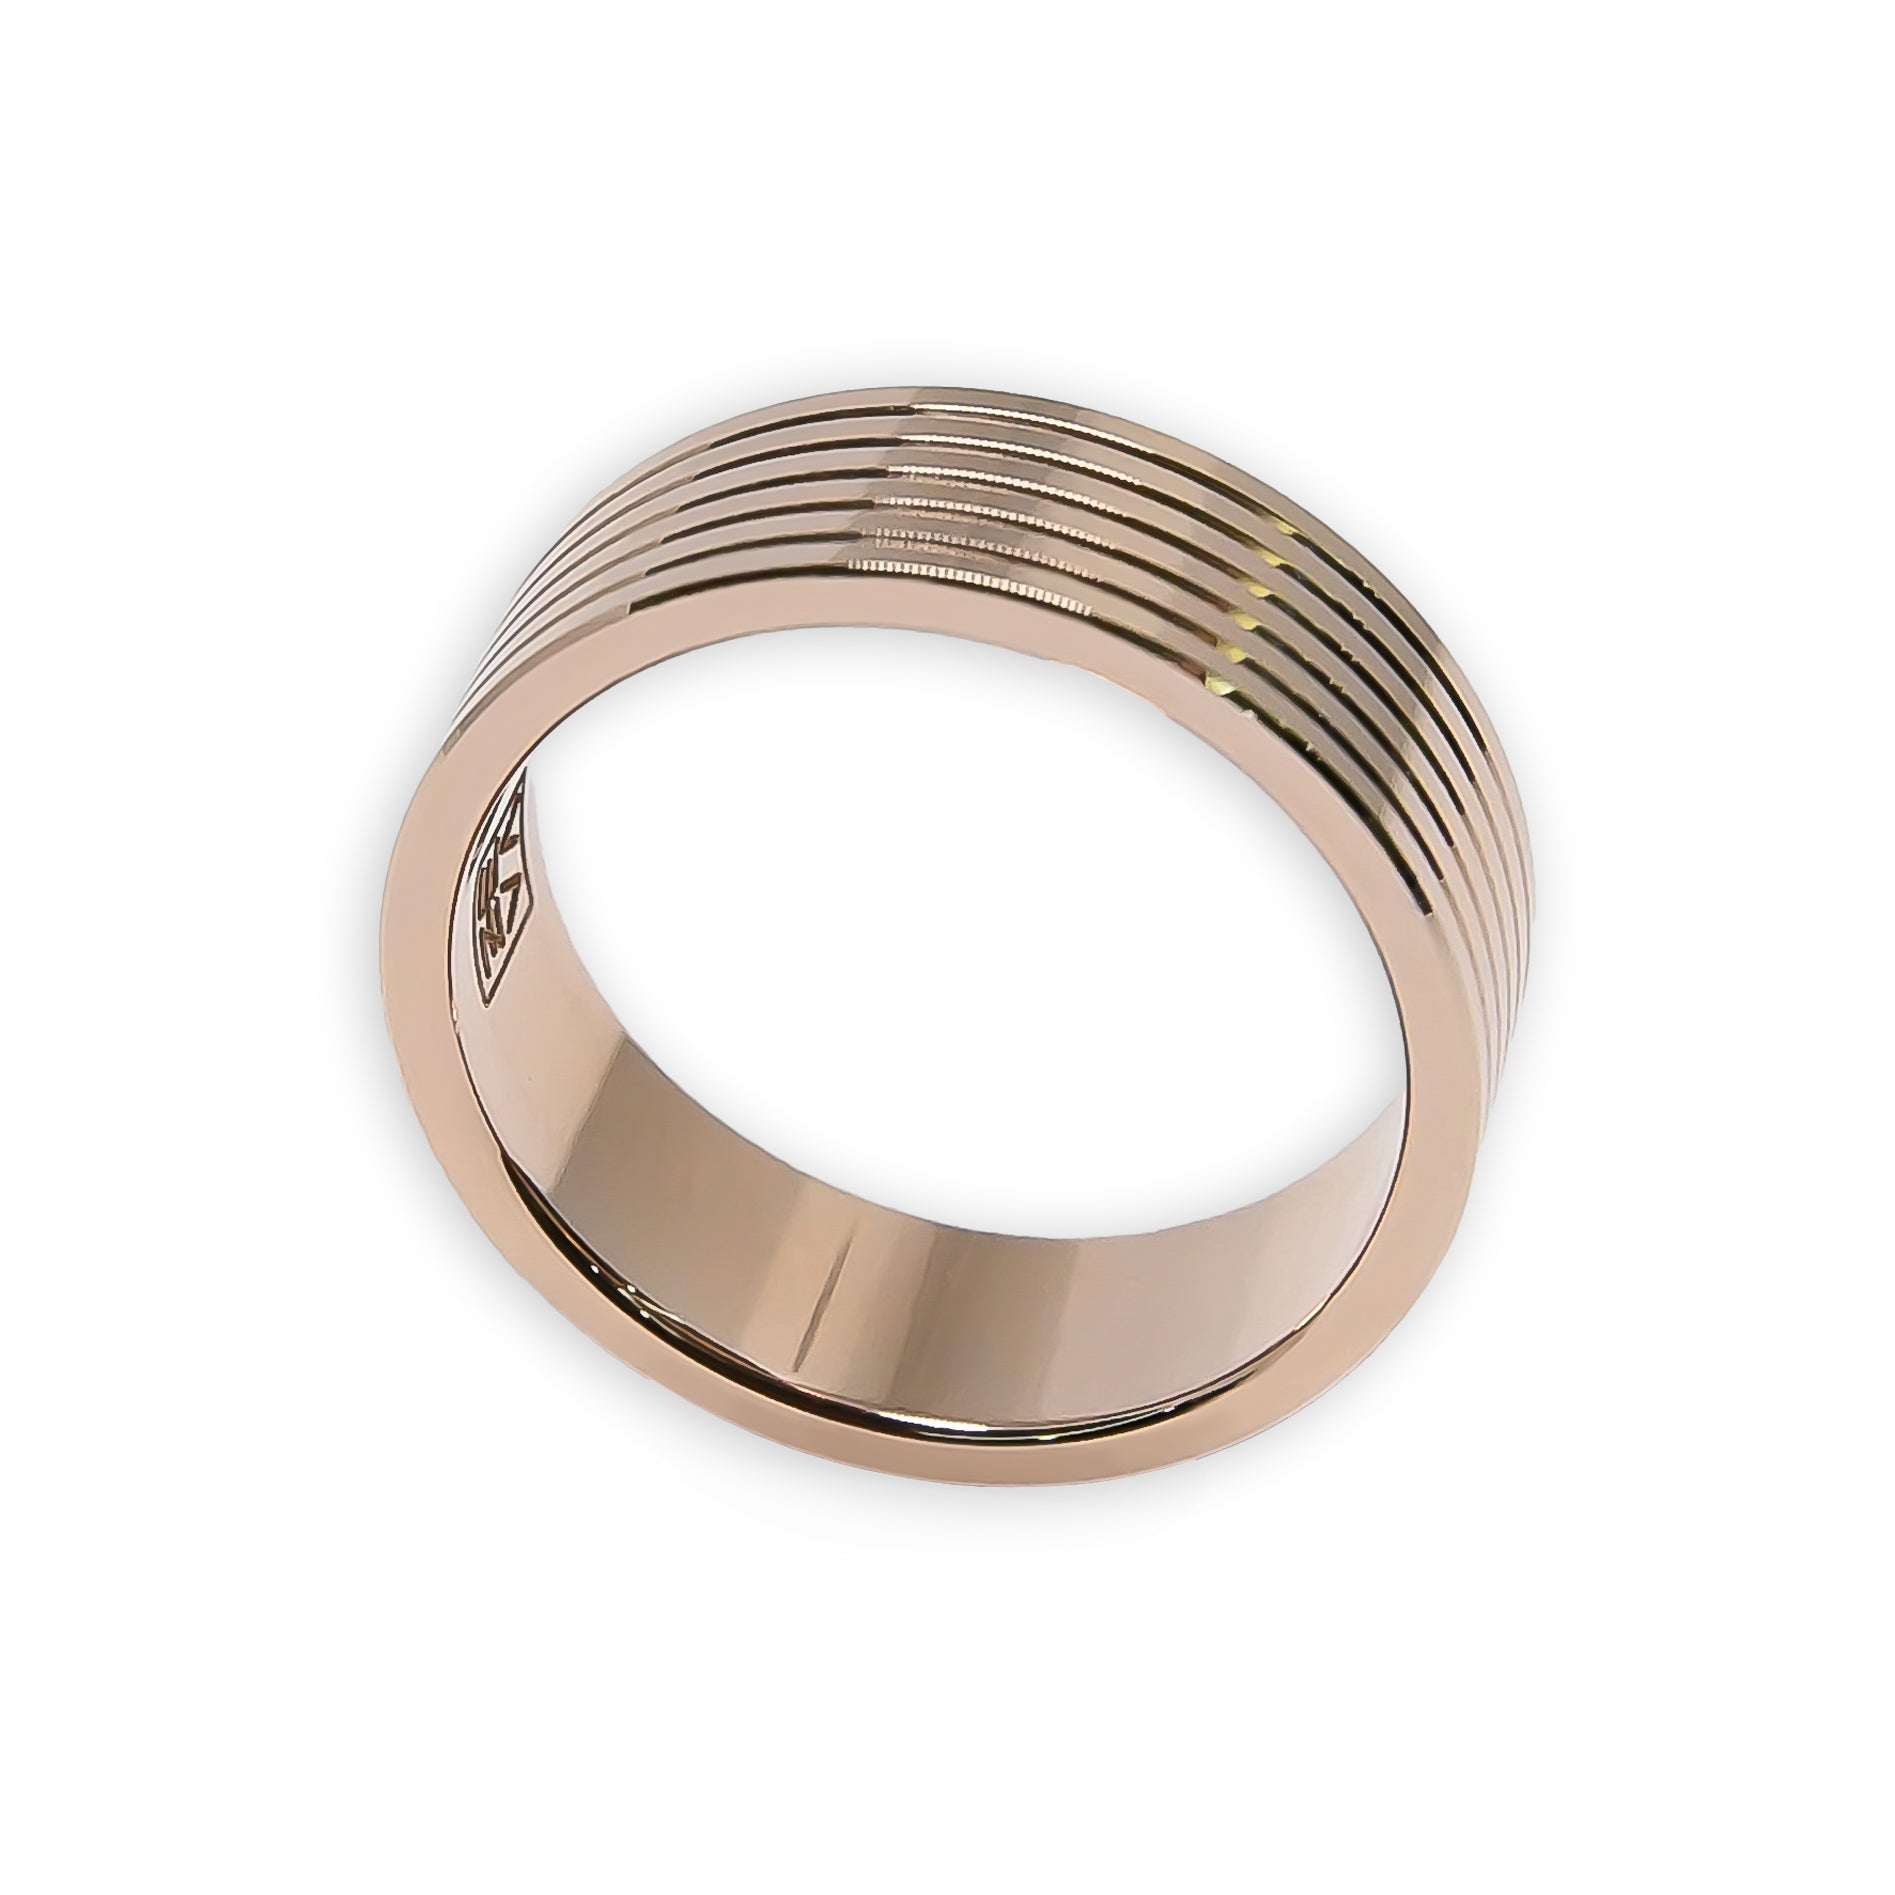 Ring MOTION 6mm red gold 18k 750